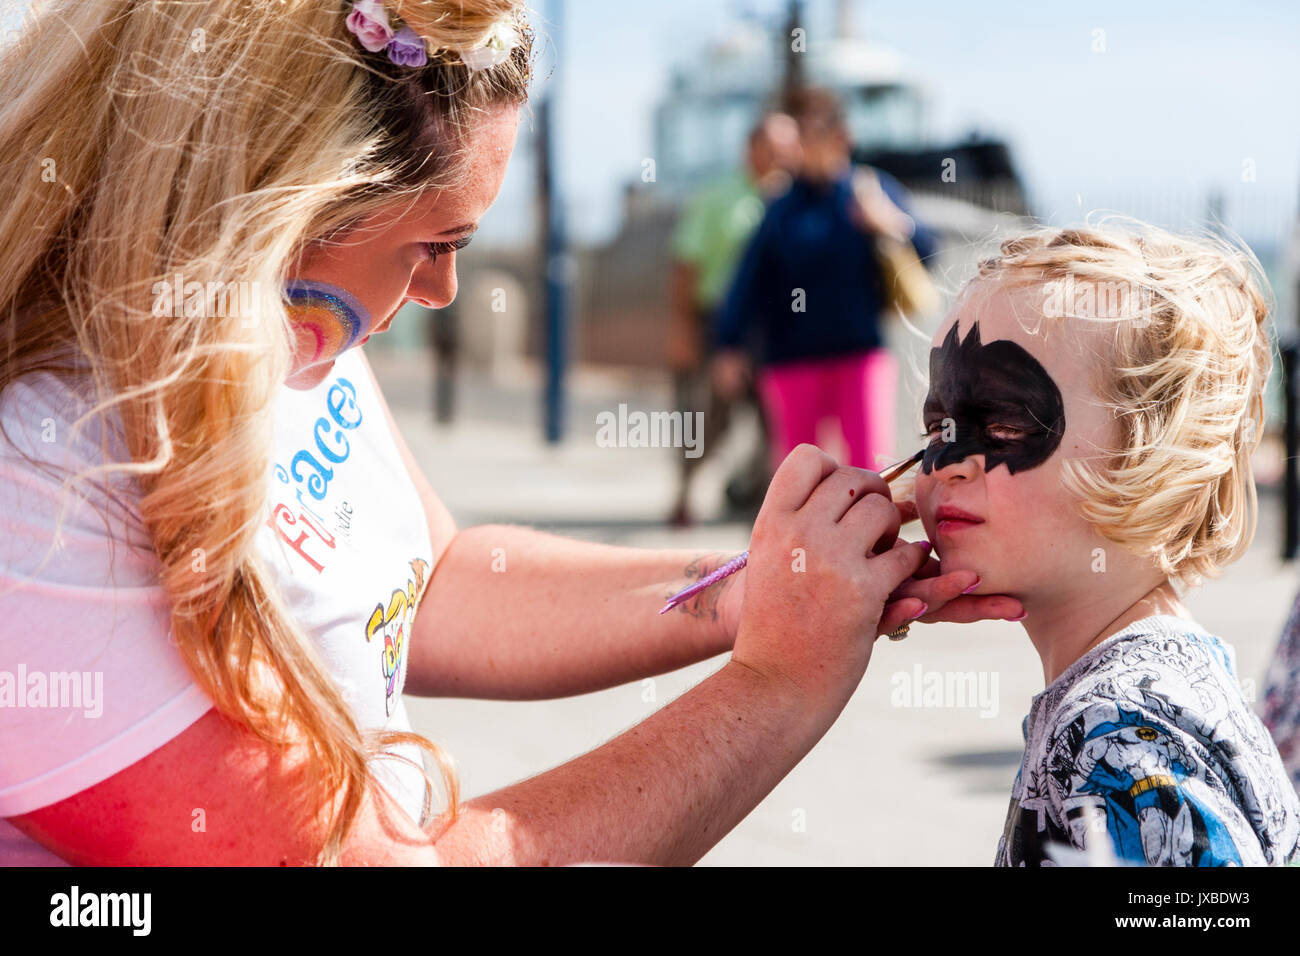 Young Caucasian child, girl, 5-6 years old, sitting in sunshine having her face painted with a batman type mask by blonde woman. Stock Photo